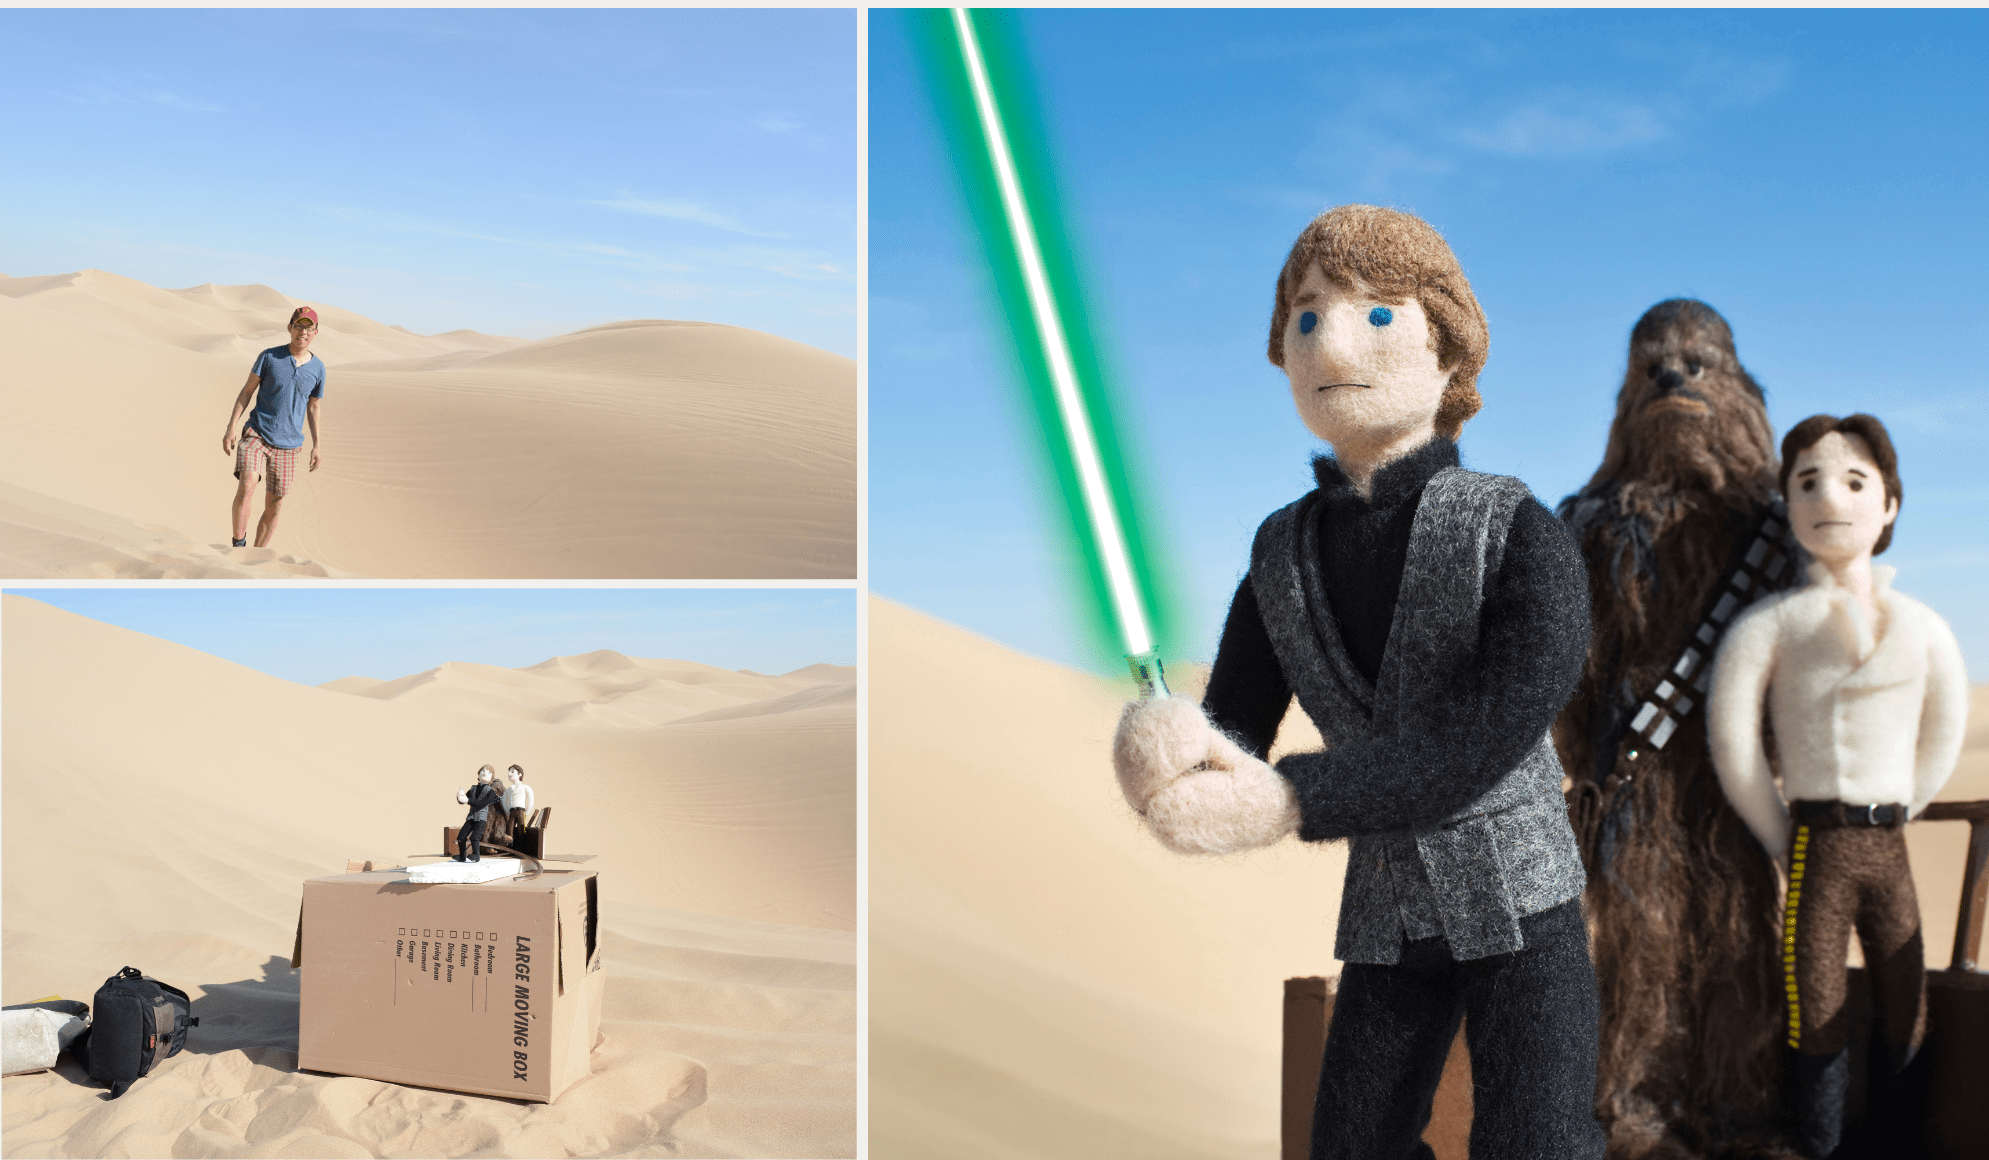 Image description: three images depicting needle-felted scenes in miniature. On the top left, the artist in an area of sand dunes. On the bottom left, the image set up for photography, the characters posed on a cardboard box. On the right, the professional photo for publication.